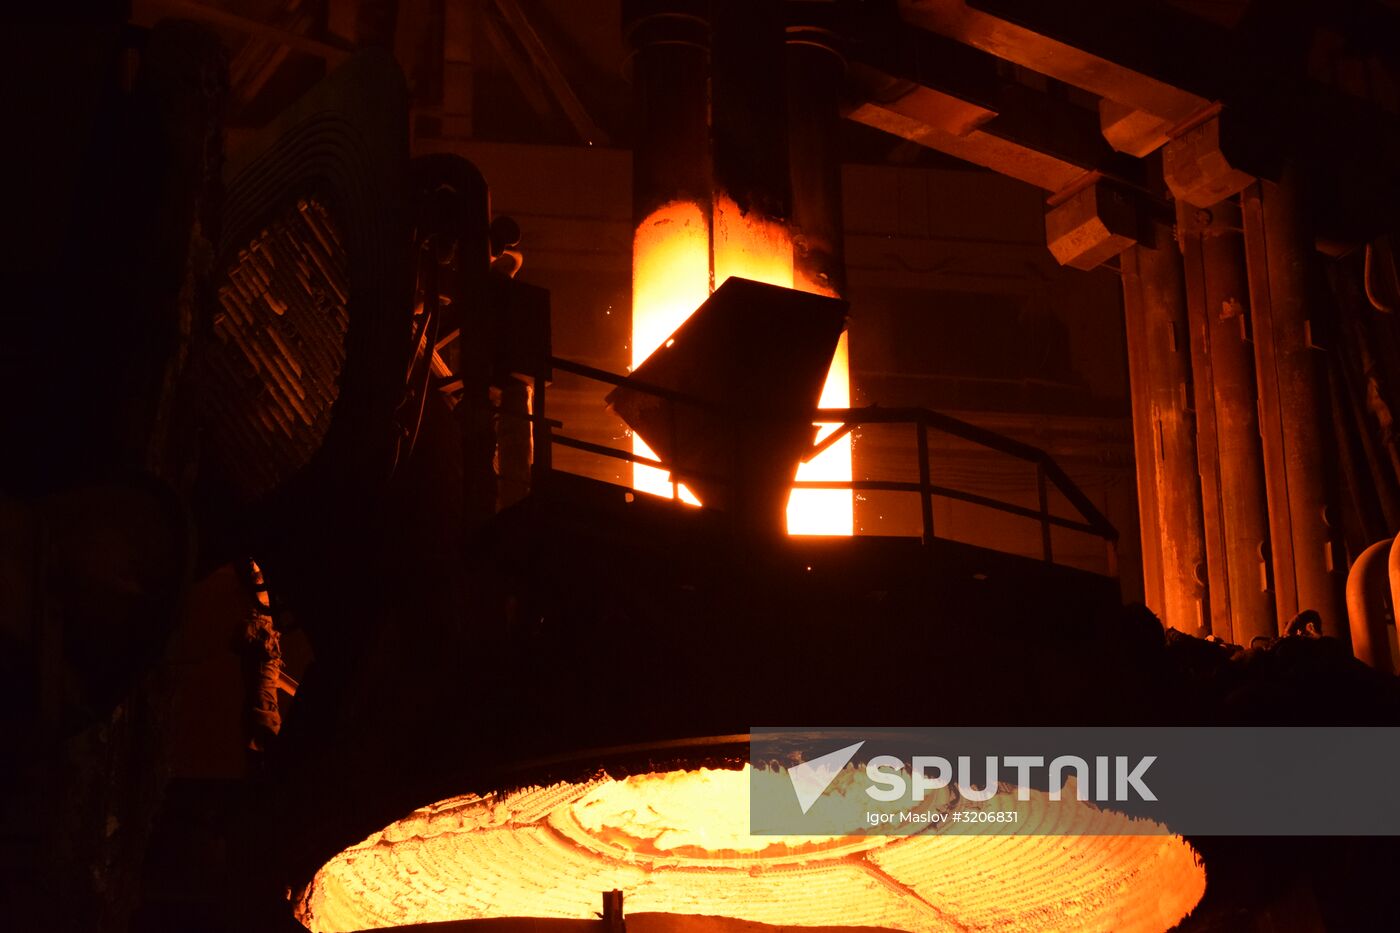 Launching Yuzovsky Metallurgical Plant in DPR